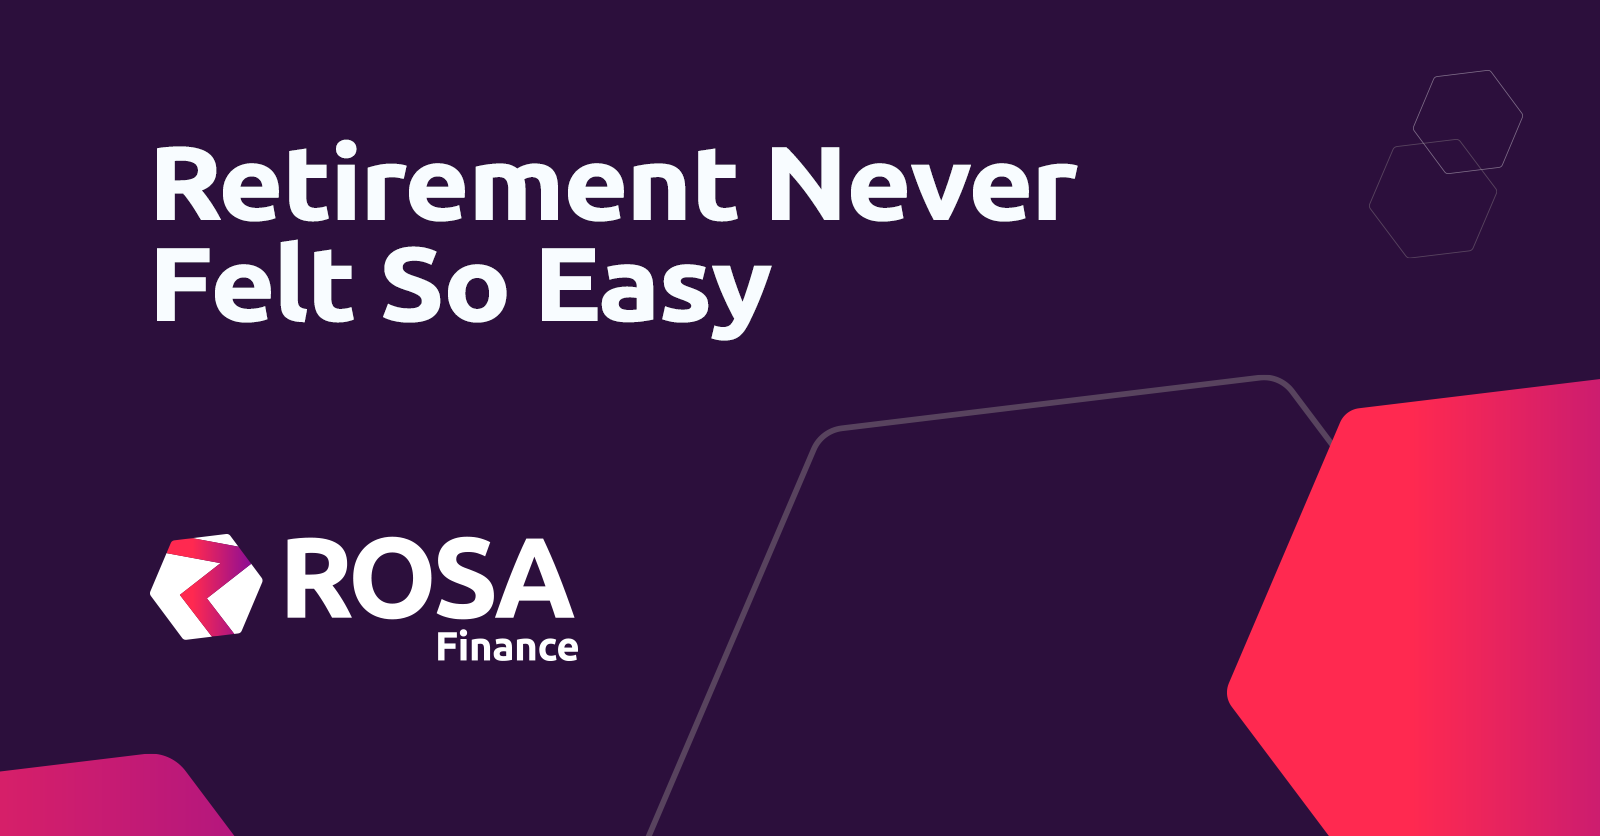 ROSA: A decentralized finance ecosystem poised to change the pension industry for the better